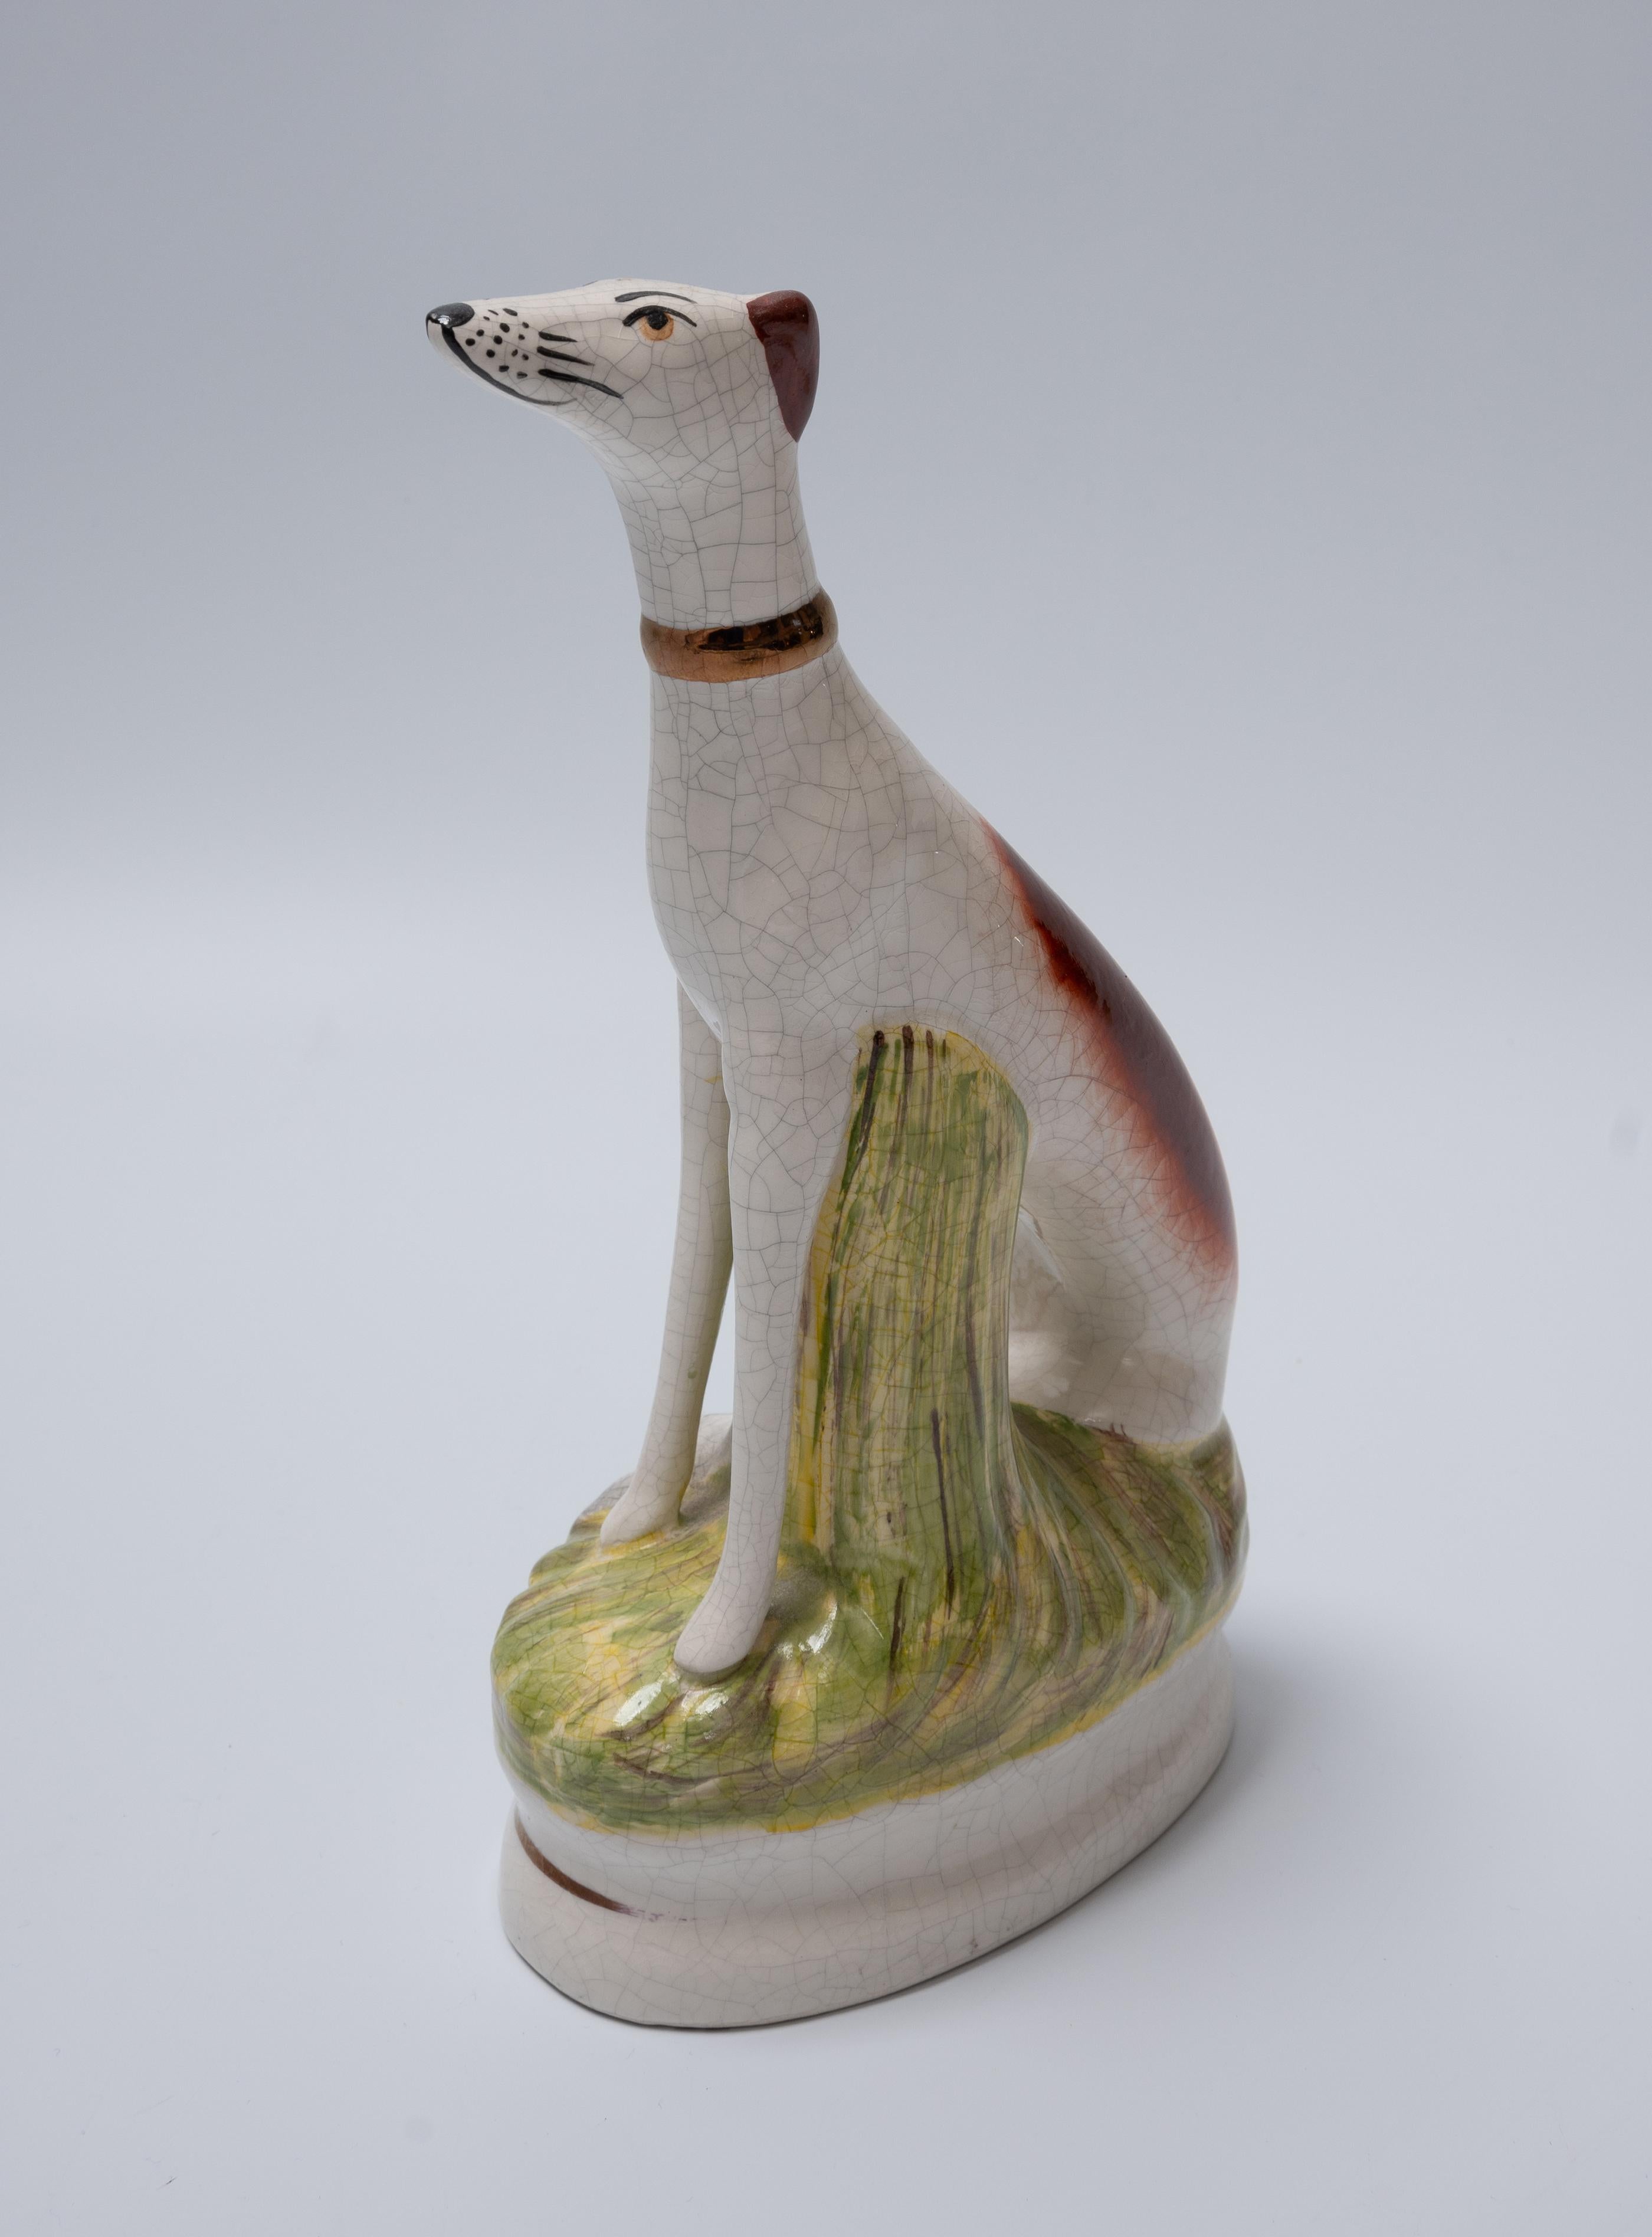 Antique 19th Century Porcelain Staffordshire Ware Hound 
By William Kent C.1850
A superb hand painted elegant hound figure presented in very good condition commensurate of age. Minor rubbing to gilding, and crazing to porcelain (please refer to